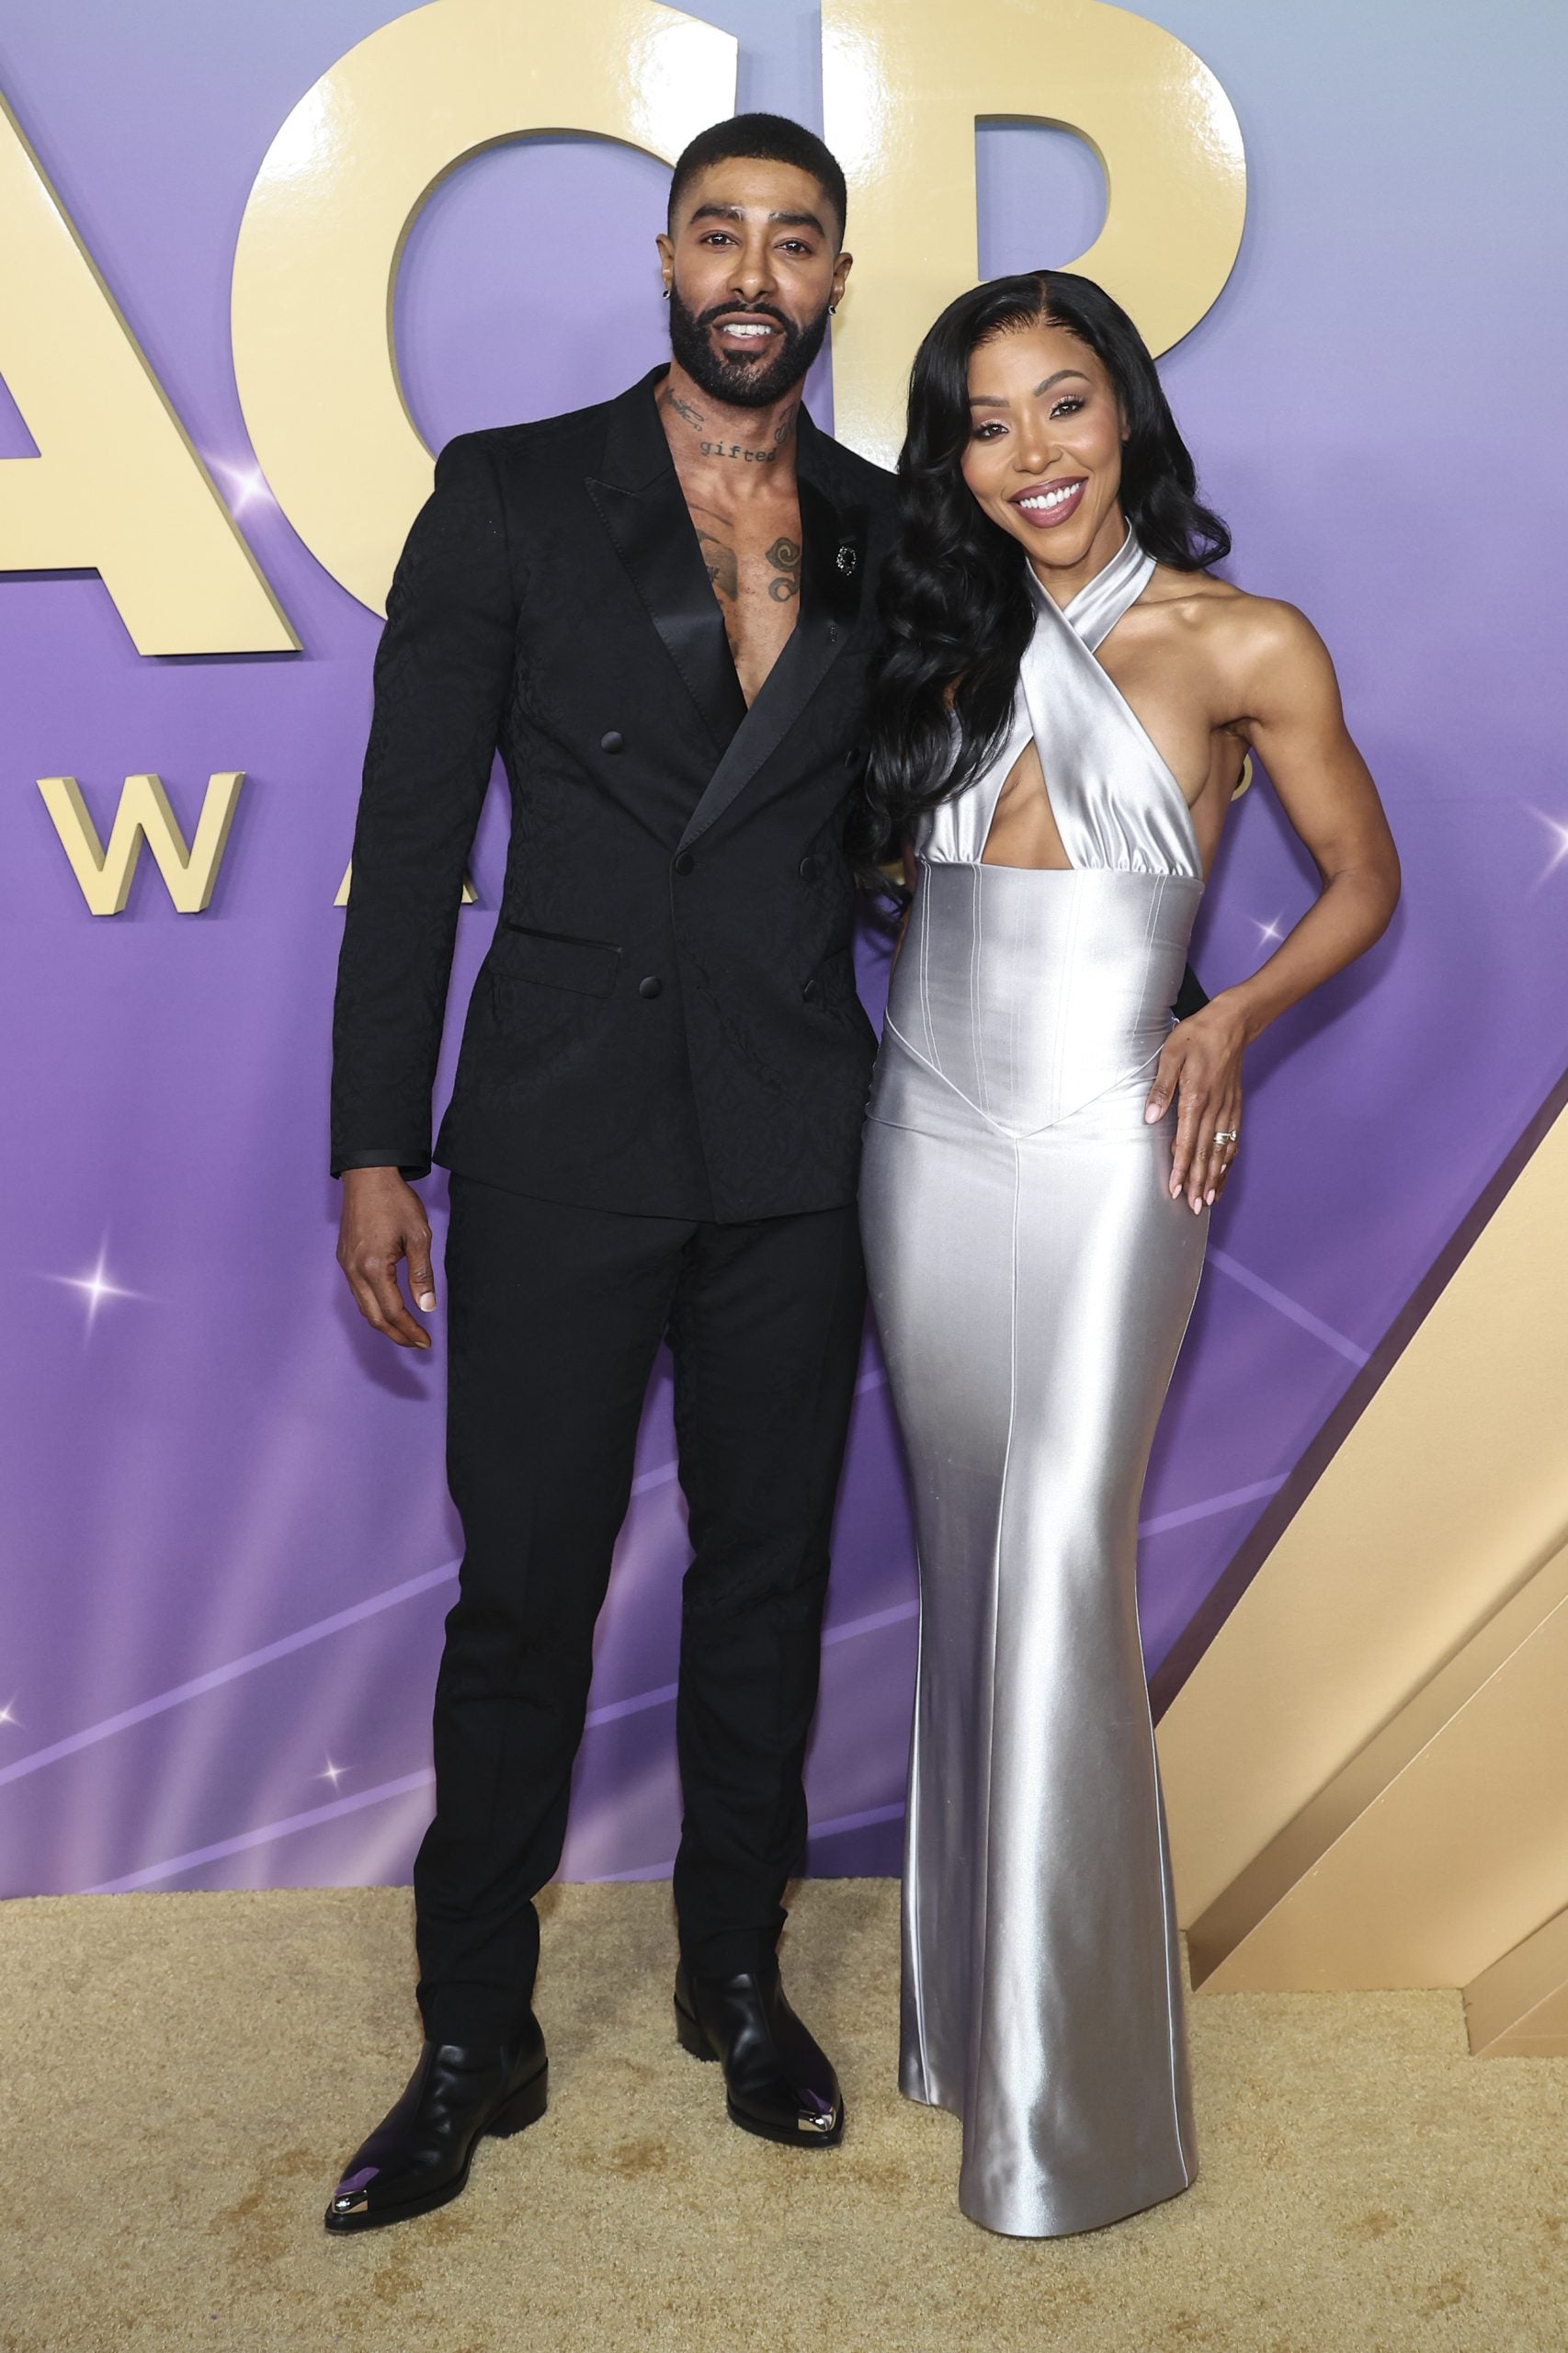 The Best Red Carpet Looks At The NAACP Image Awards